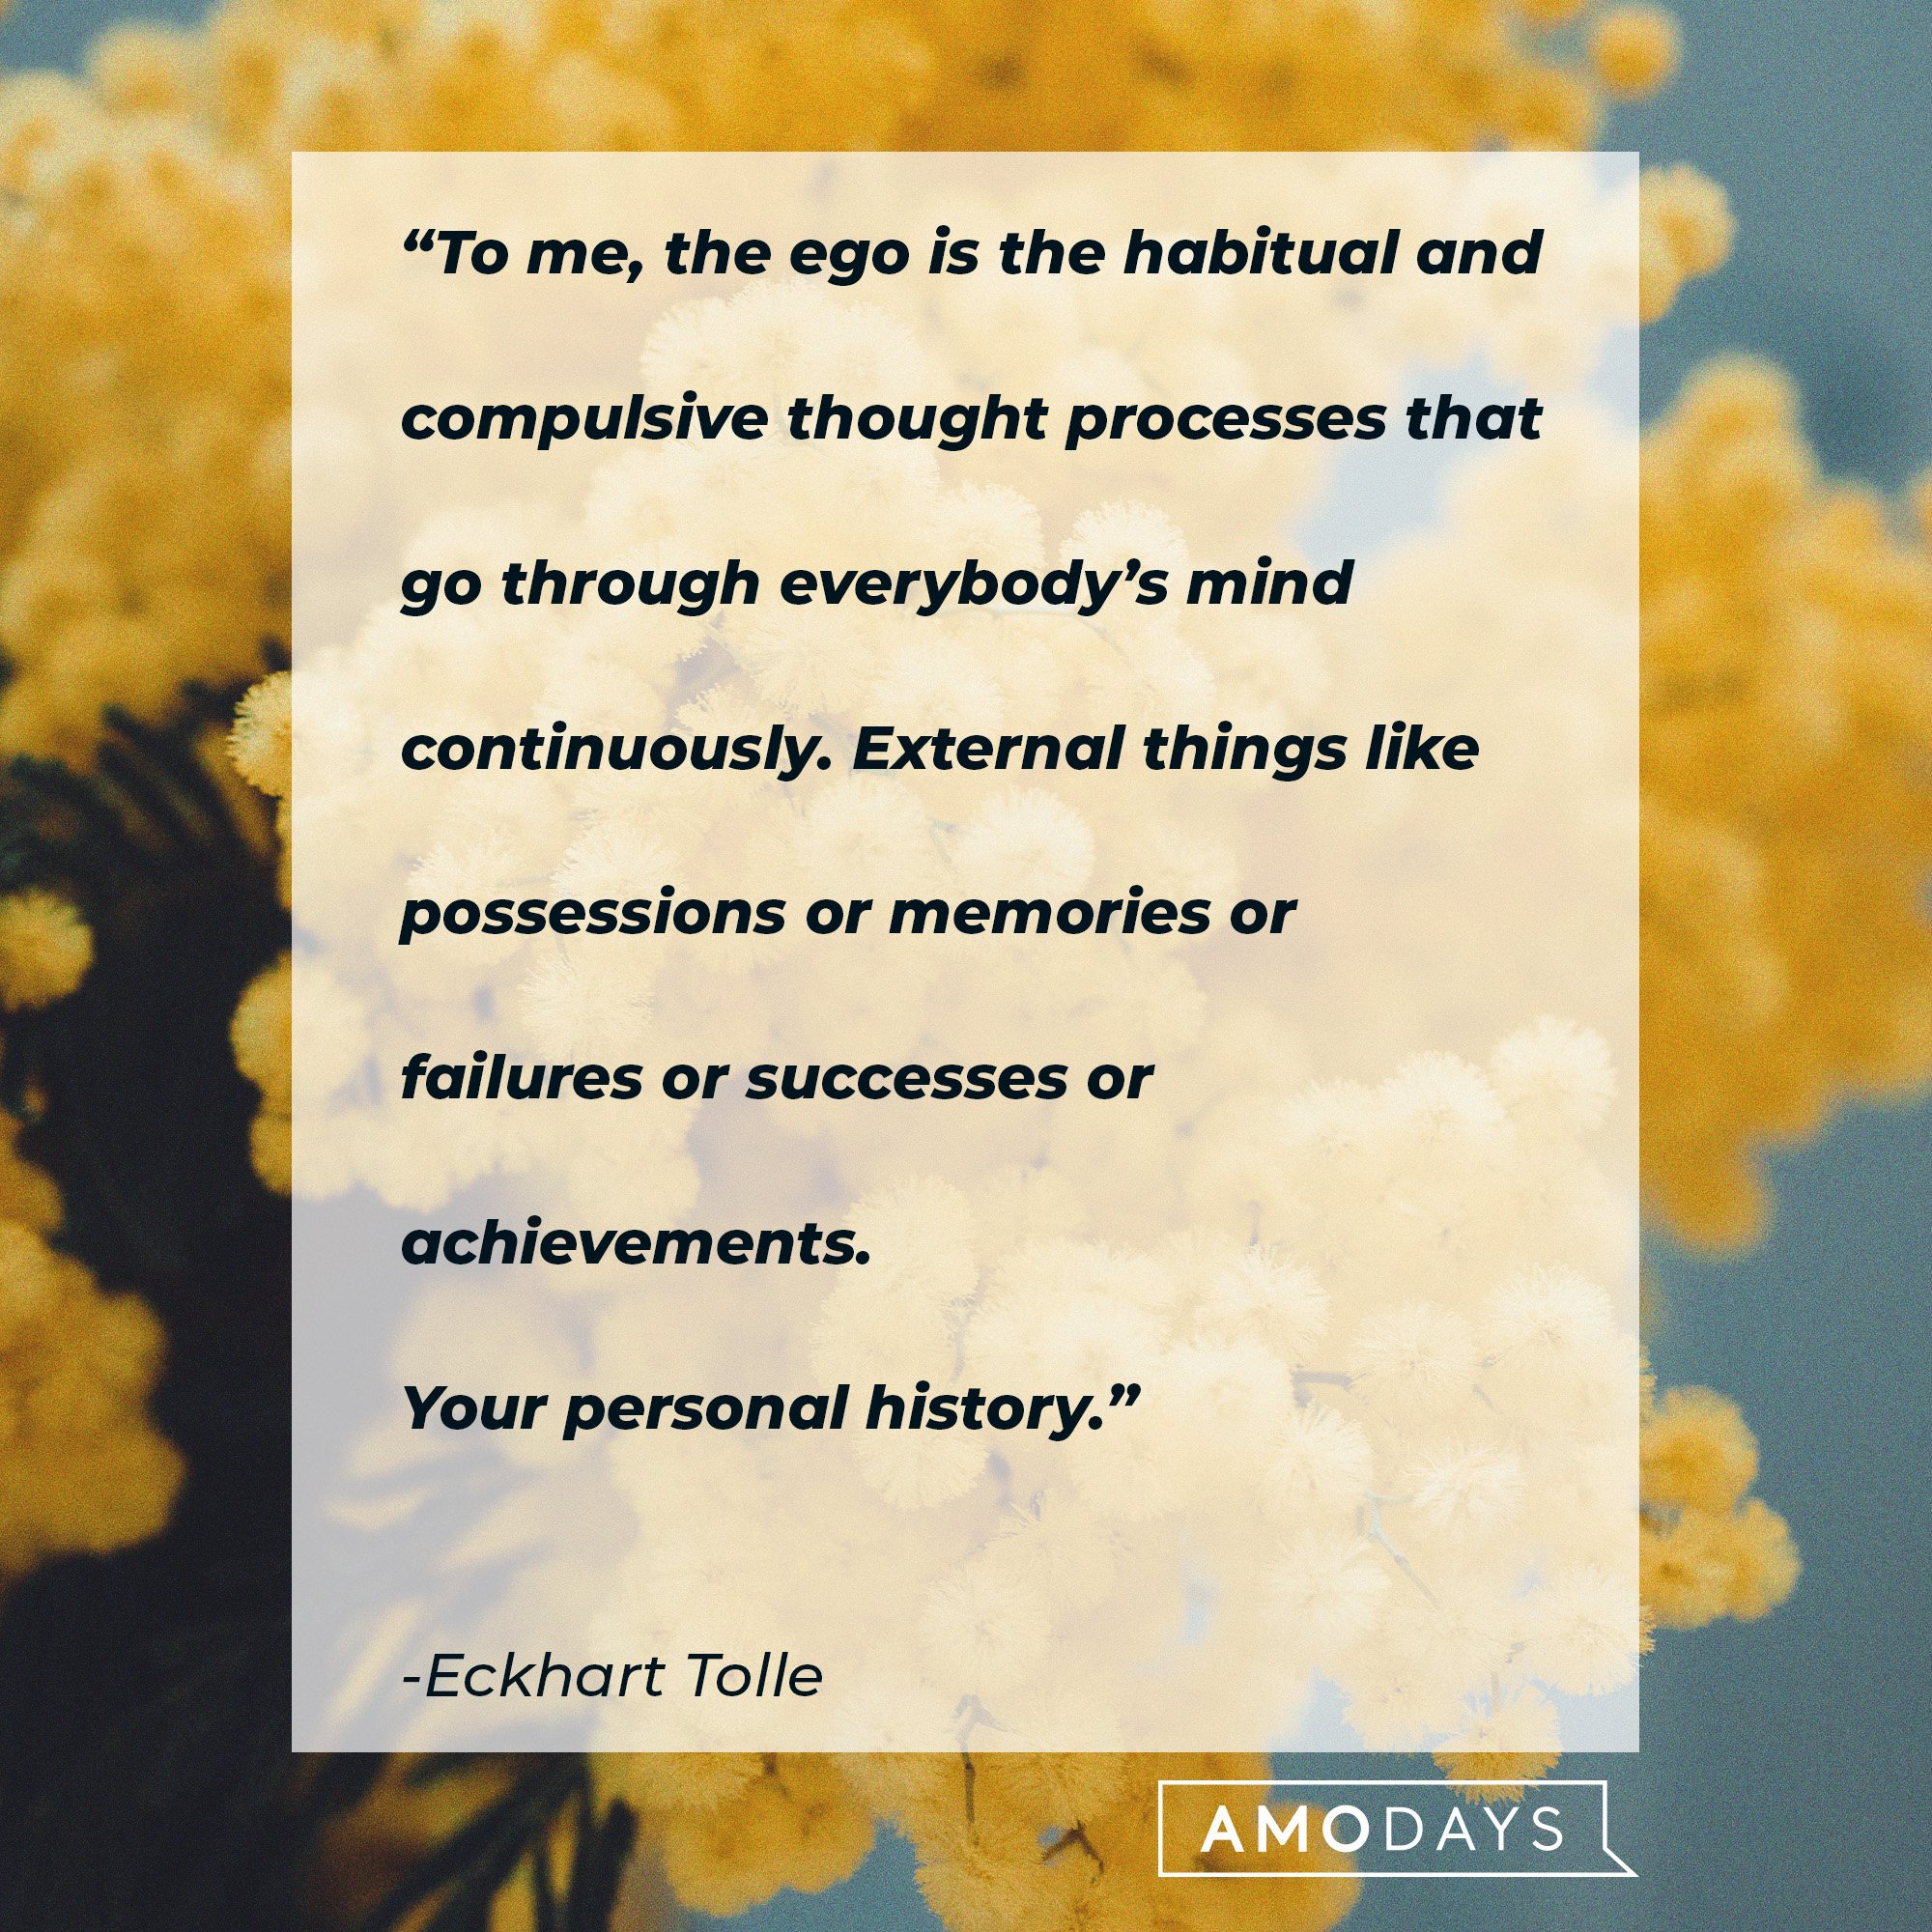  Eckhart Tolle's quote: “To me, the ego is the habitual and compulsive thought processes that go through everybody’s mind continuously. External things like possessions or memories or failures or successes or achievements. Your personal history.” | Image: AmoDays